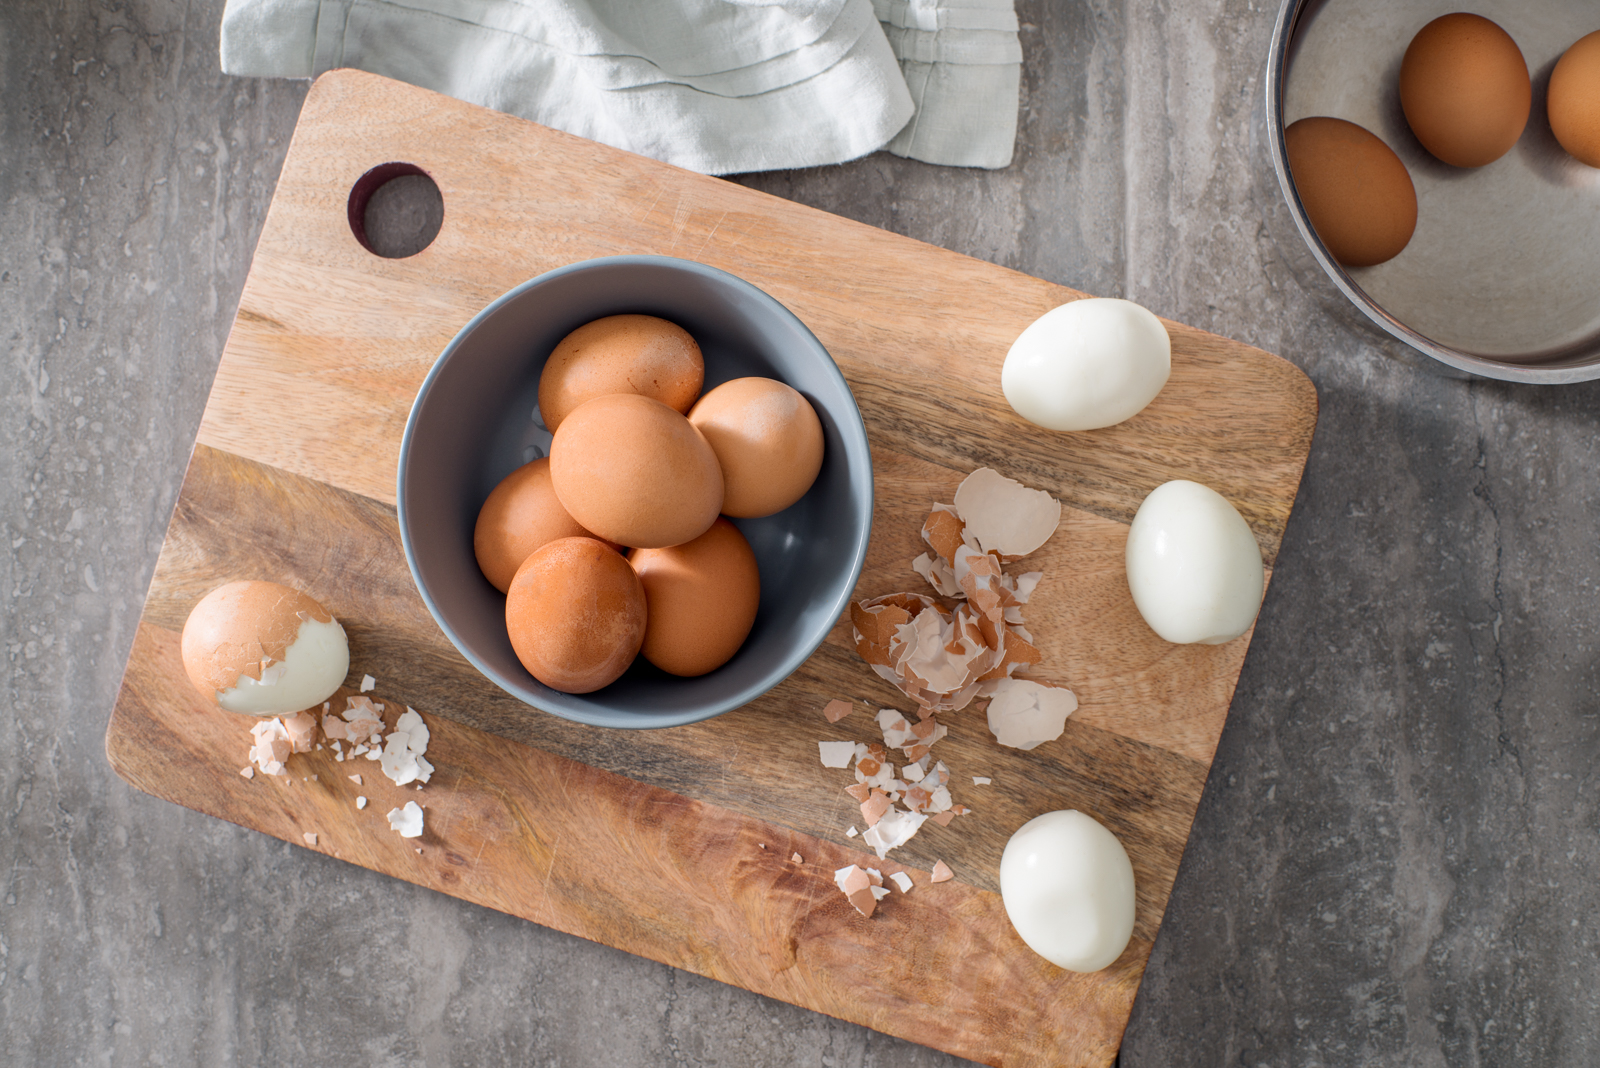 Eggs Q&A: Why are eggs different sizes?